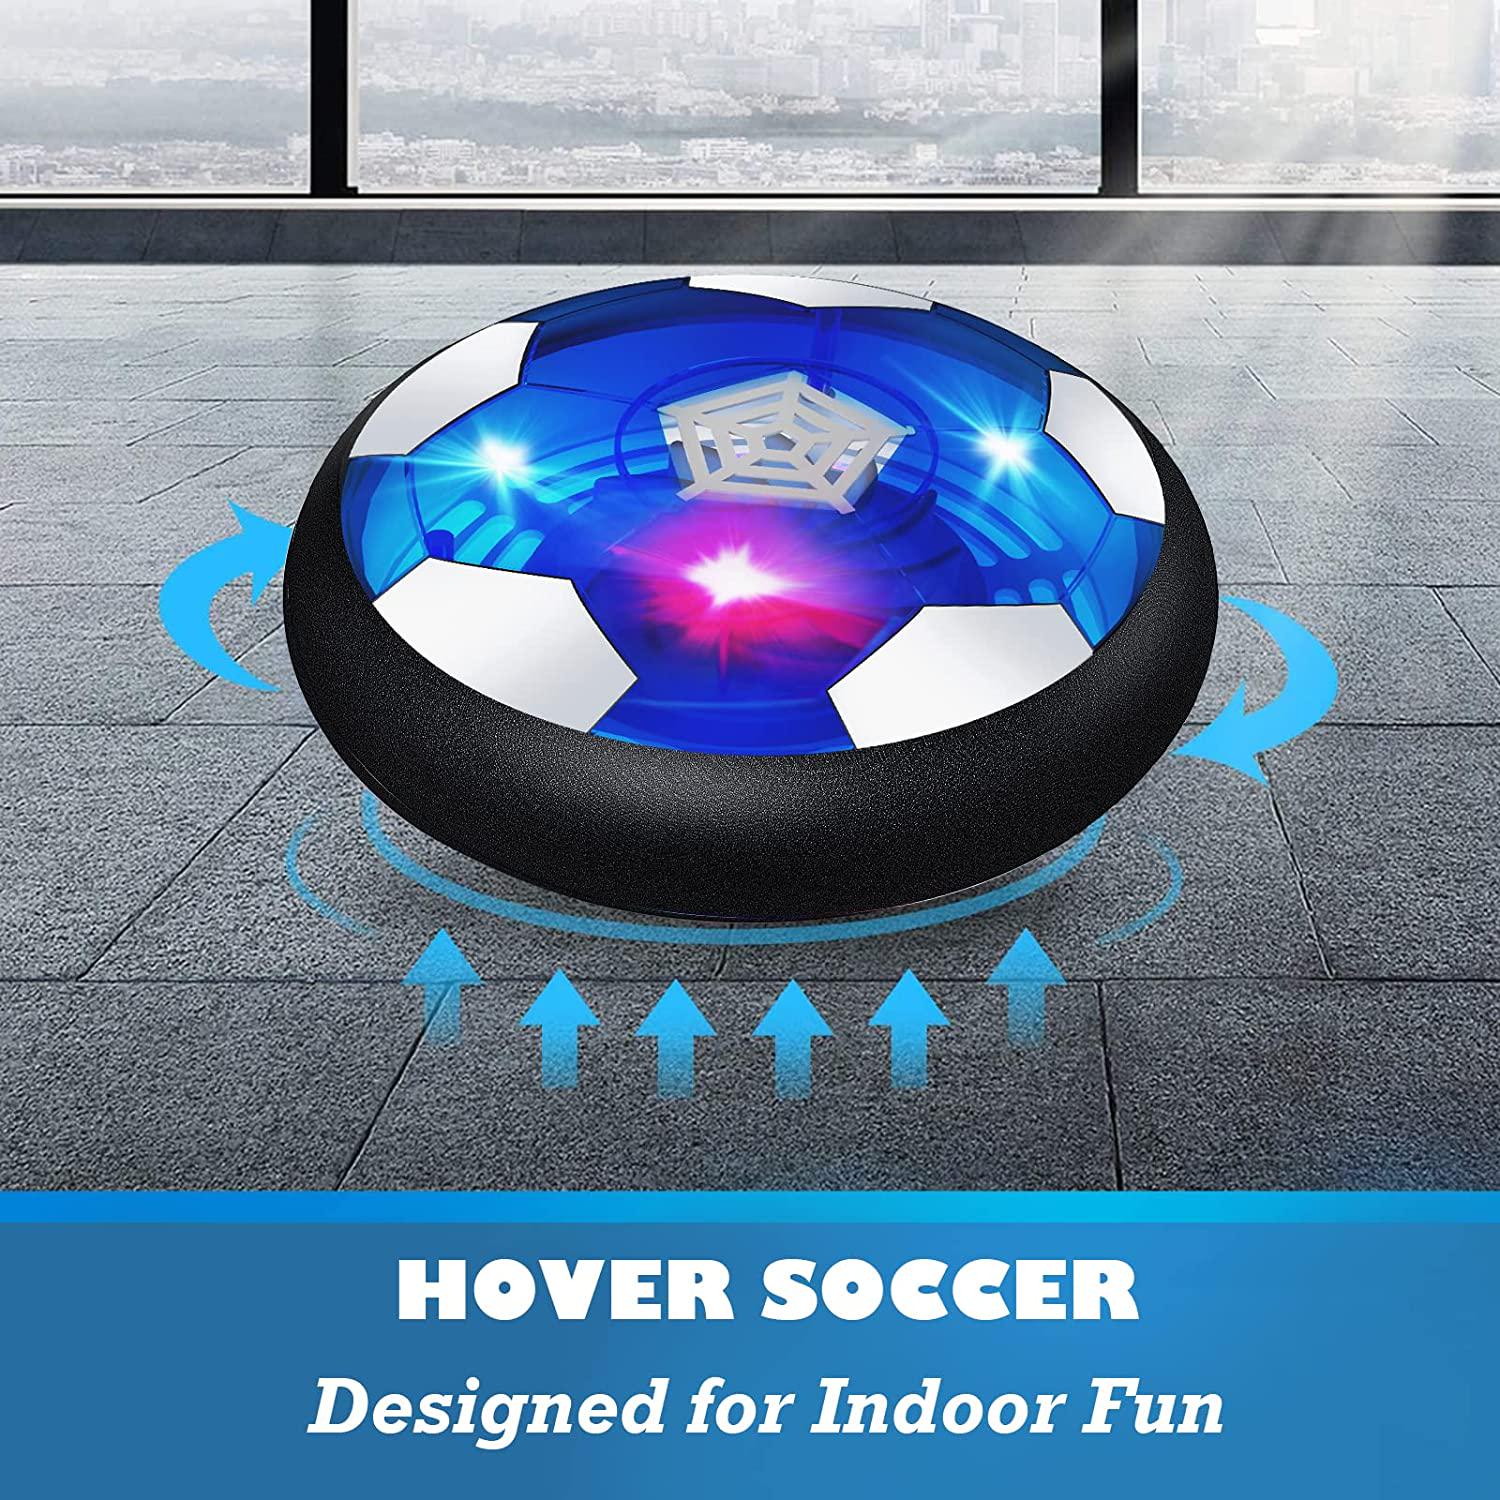 MelMelKat, MelMelKat Rechargeable Hover Soccer Ball [Upgraded], Christmas Stocking Stuffers Kids Toys Soccer Games with Colorful LED Light Indoor Activities Birthday Gifts for Boys Girls Toddlers 3-10 Years Old